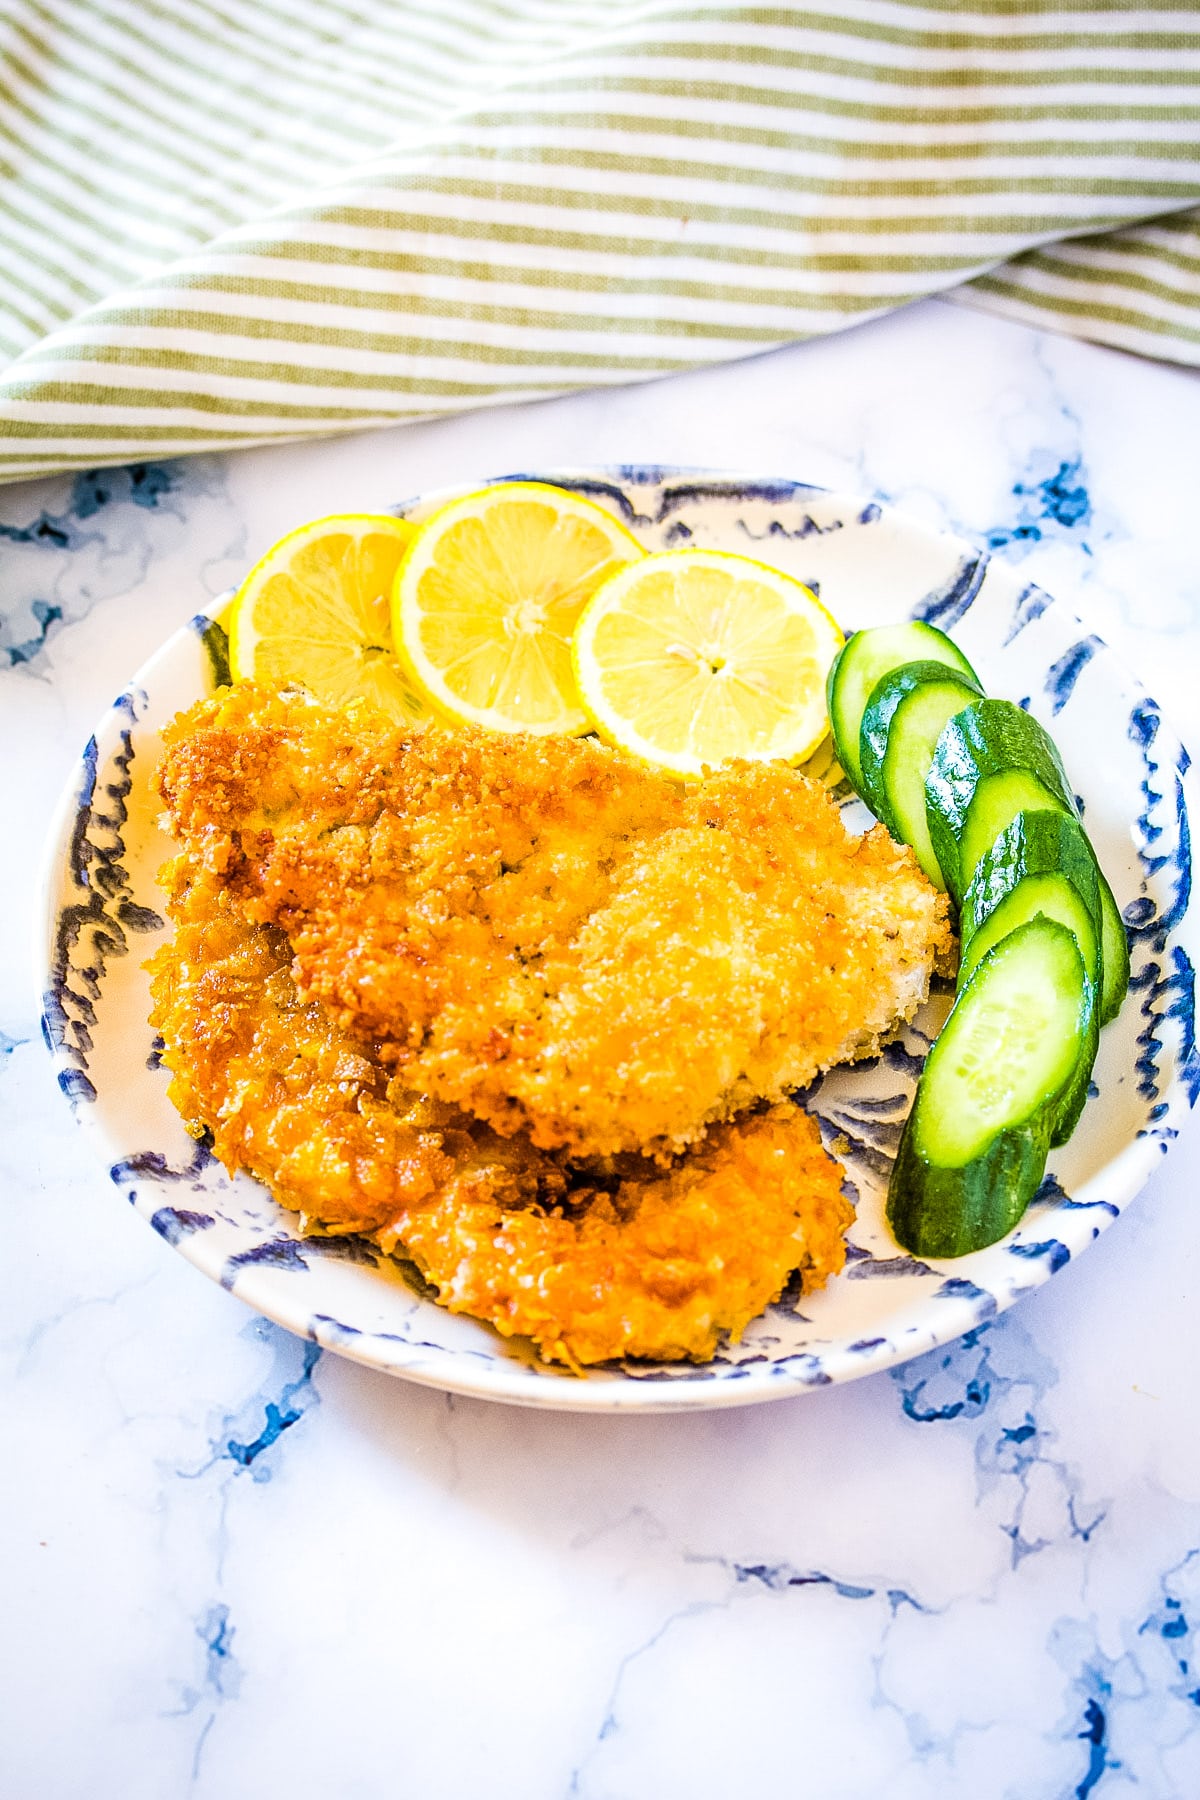 Two crispy chicken cutlets on a blue and white plate with sliced lemon and sliced cucumber.